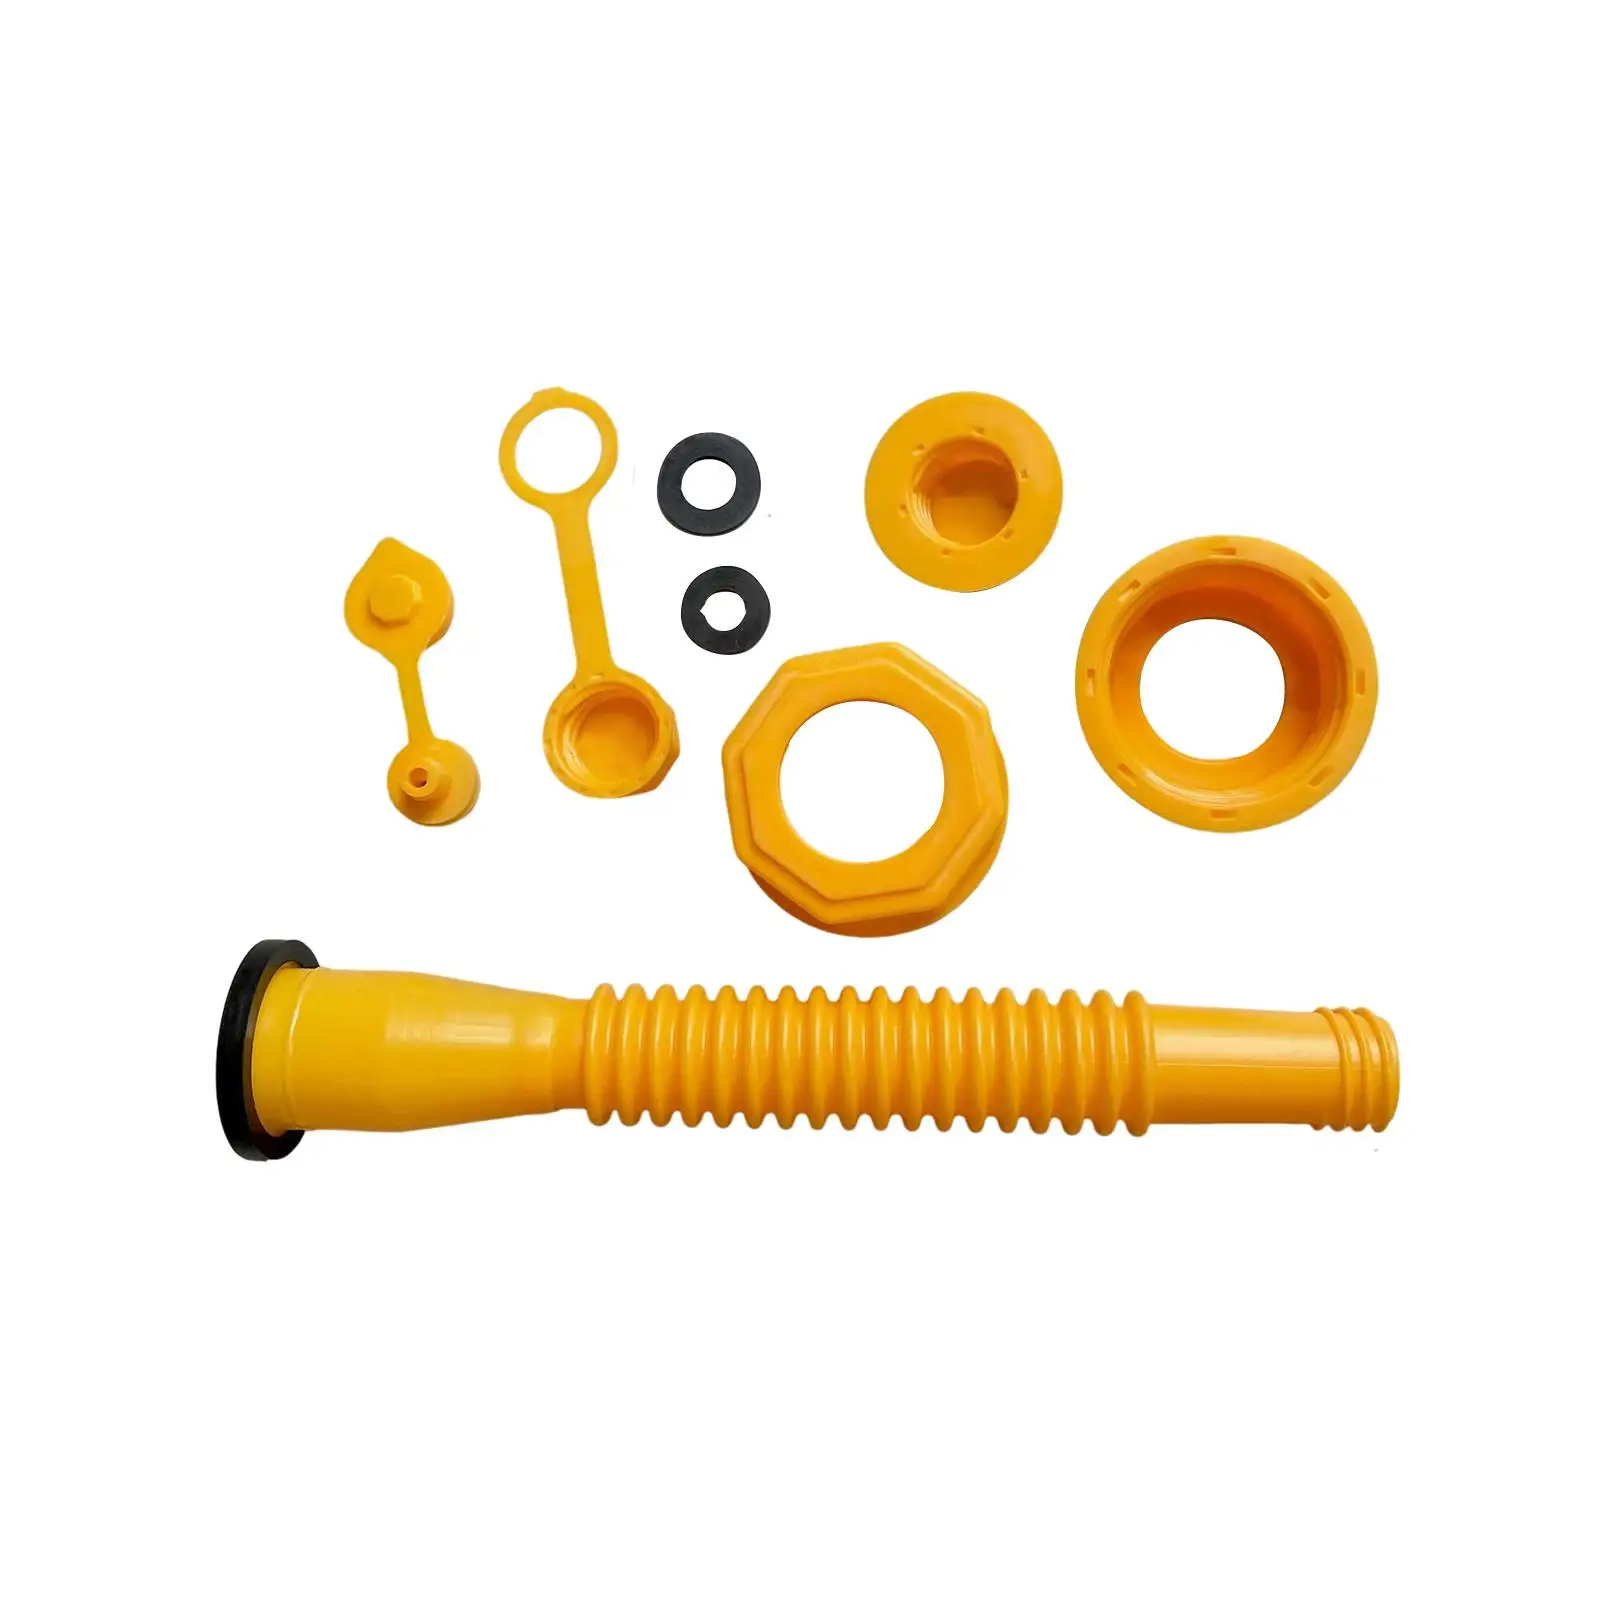 Gas Can Spout Kit Plastic Gas Nozzle Plug Replacement for Petrol Cans